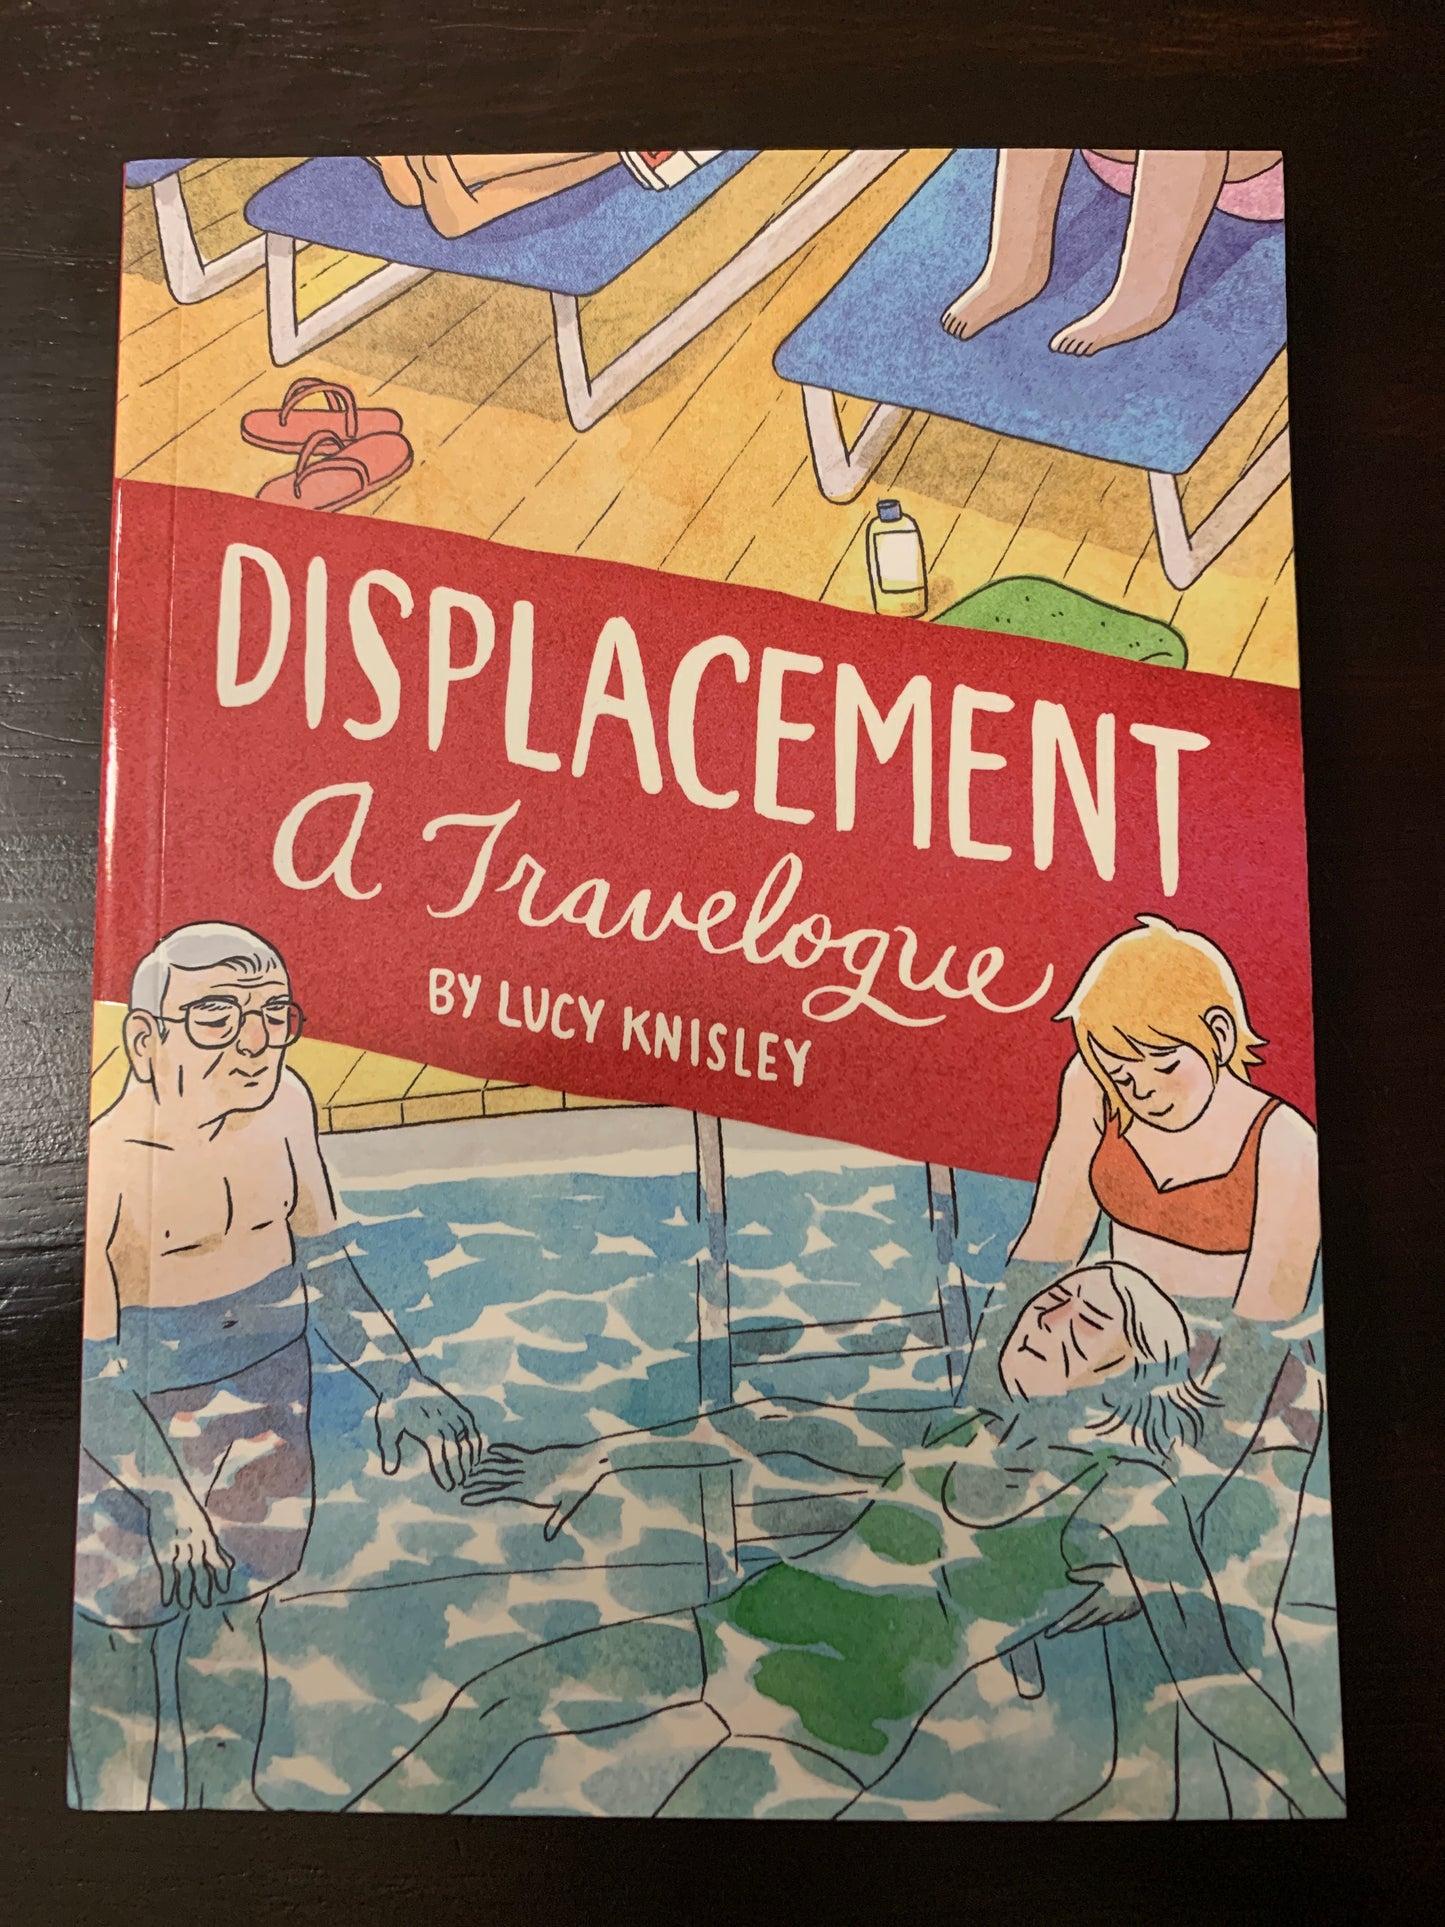 Displacement: A Travelogue